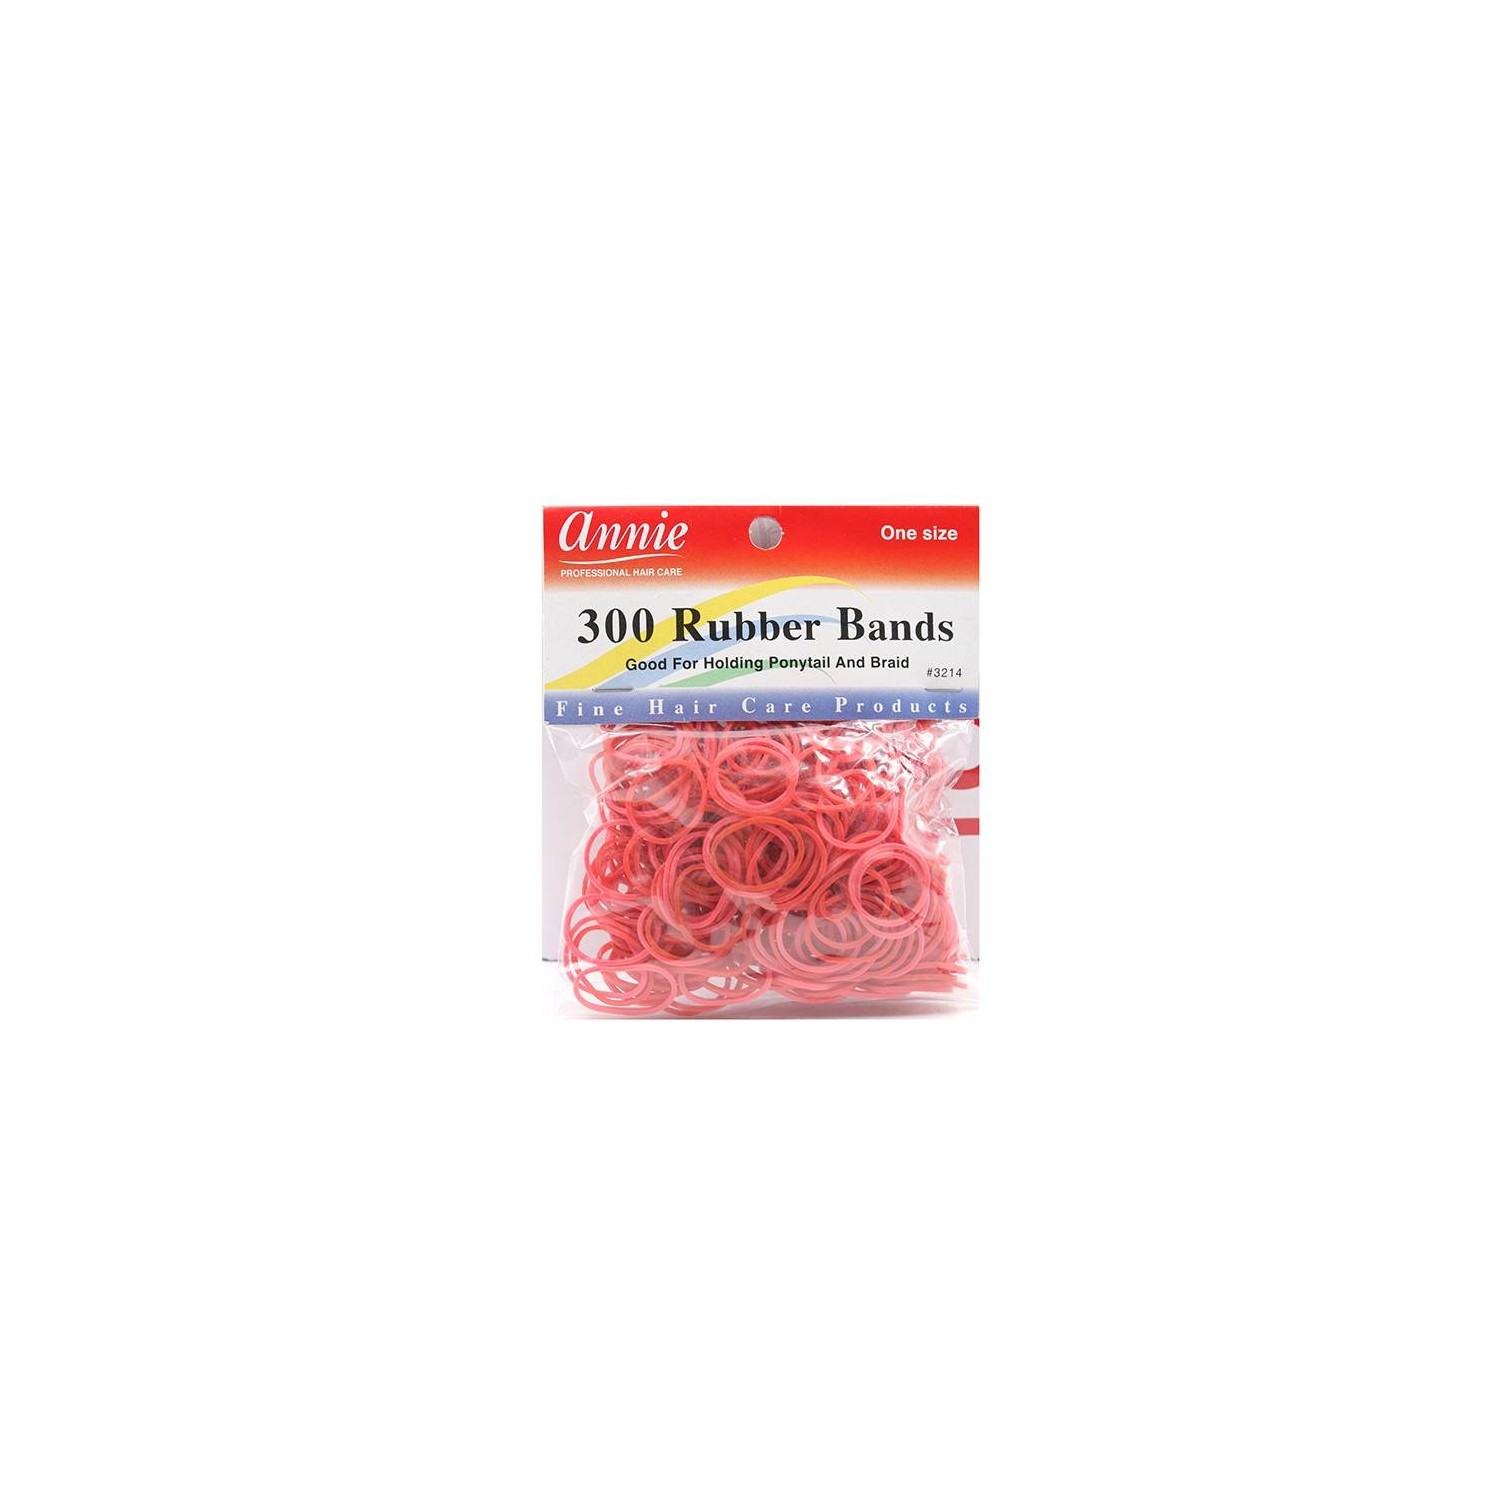 Annie 300 Rubber Bands Red 3214 (rubbers)